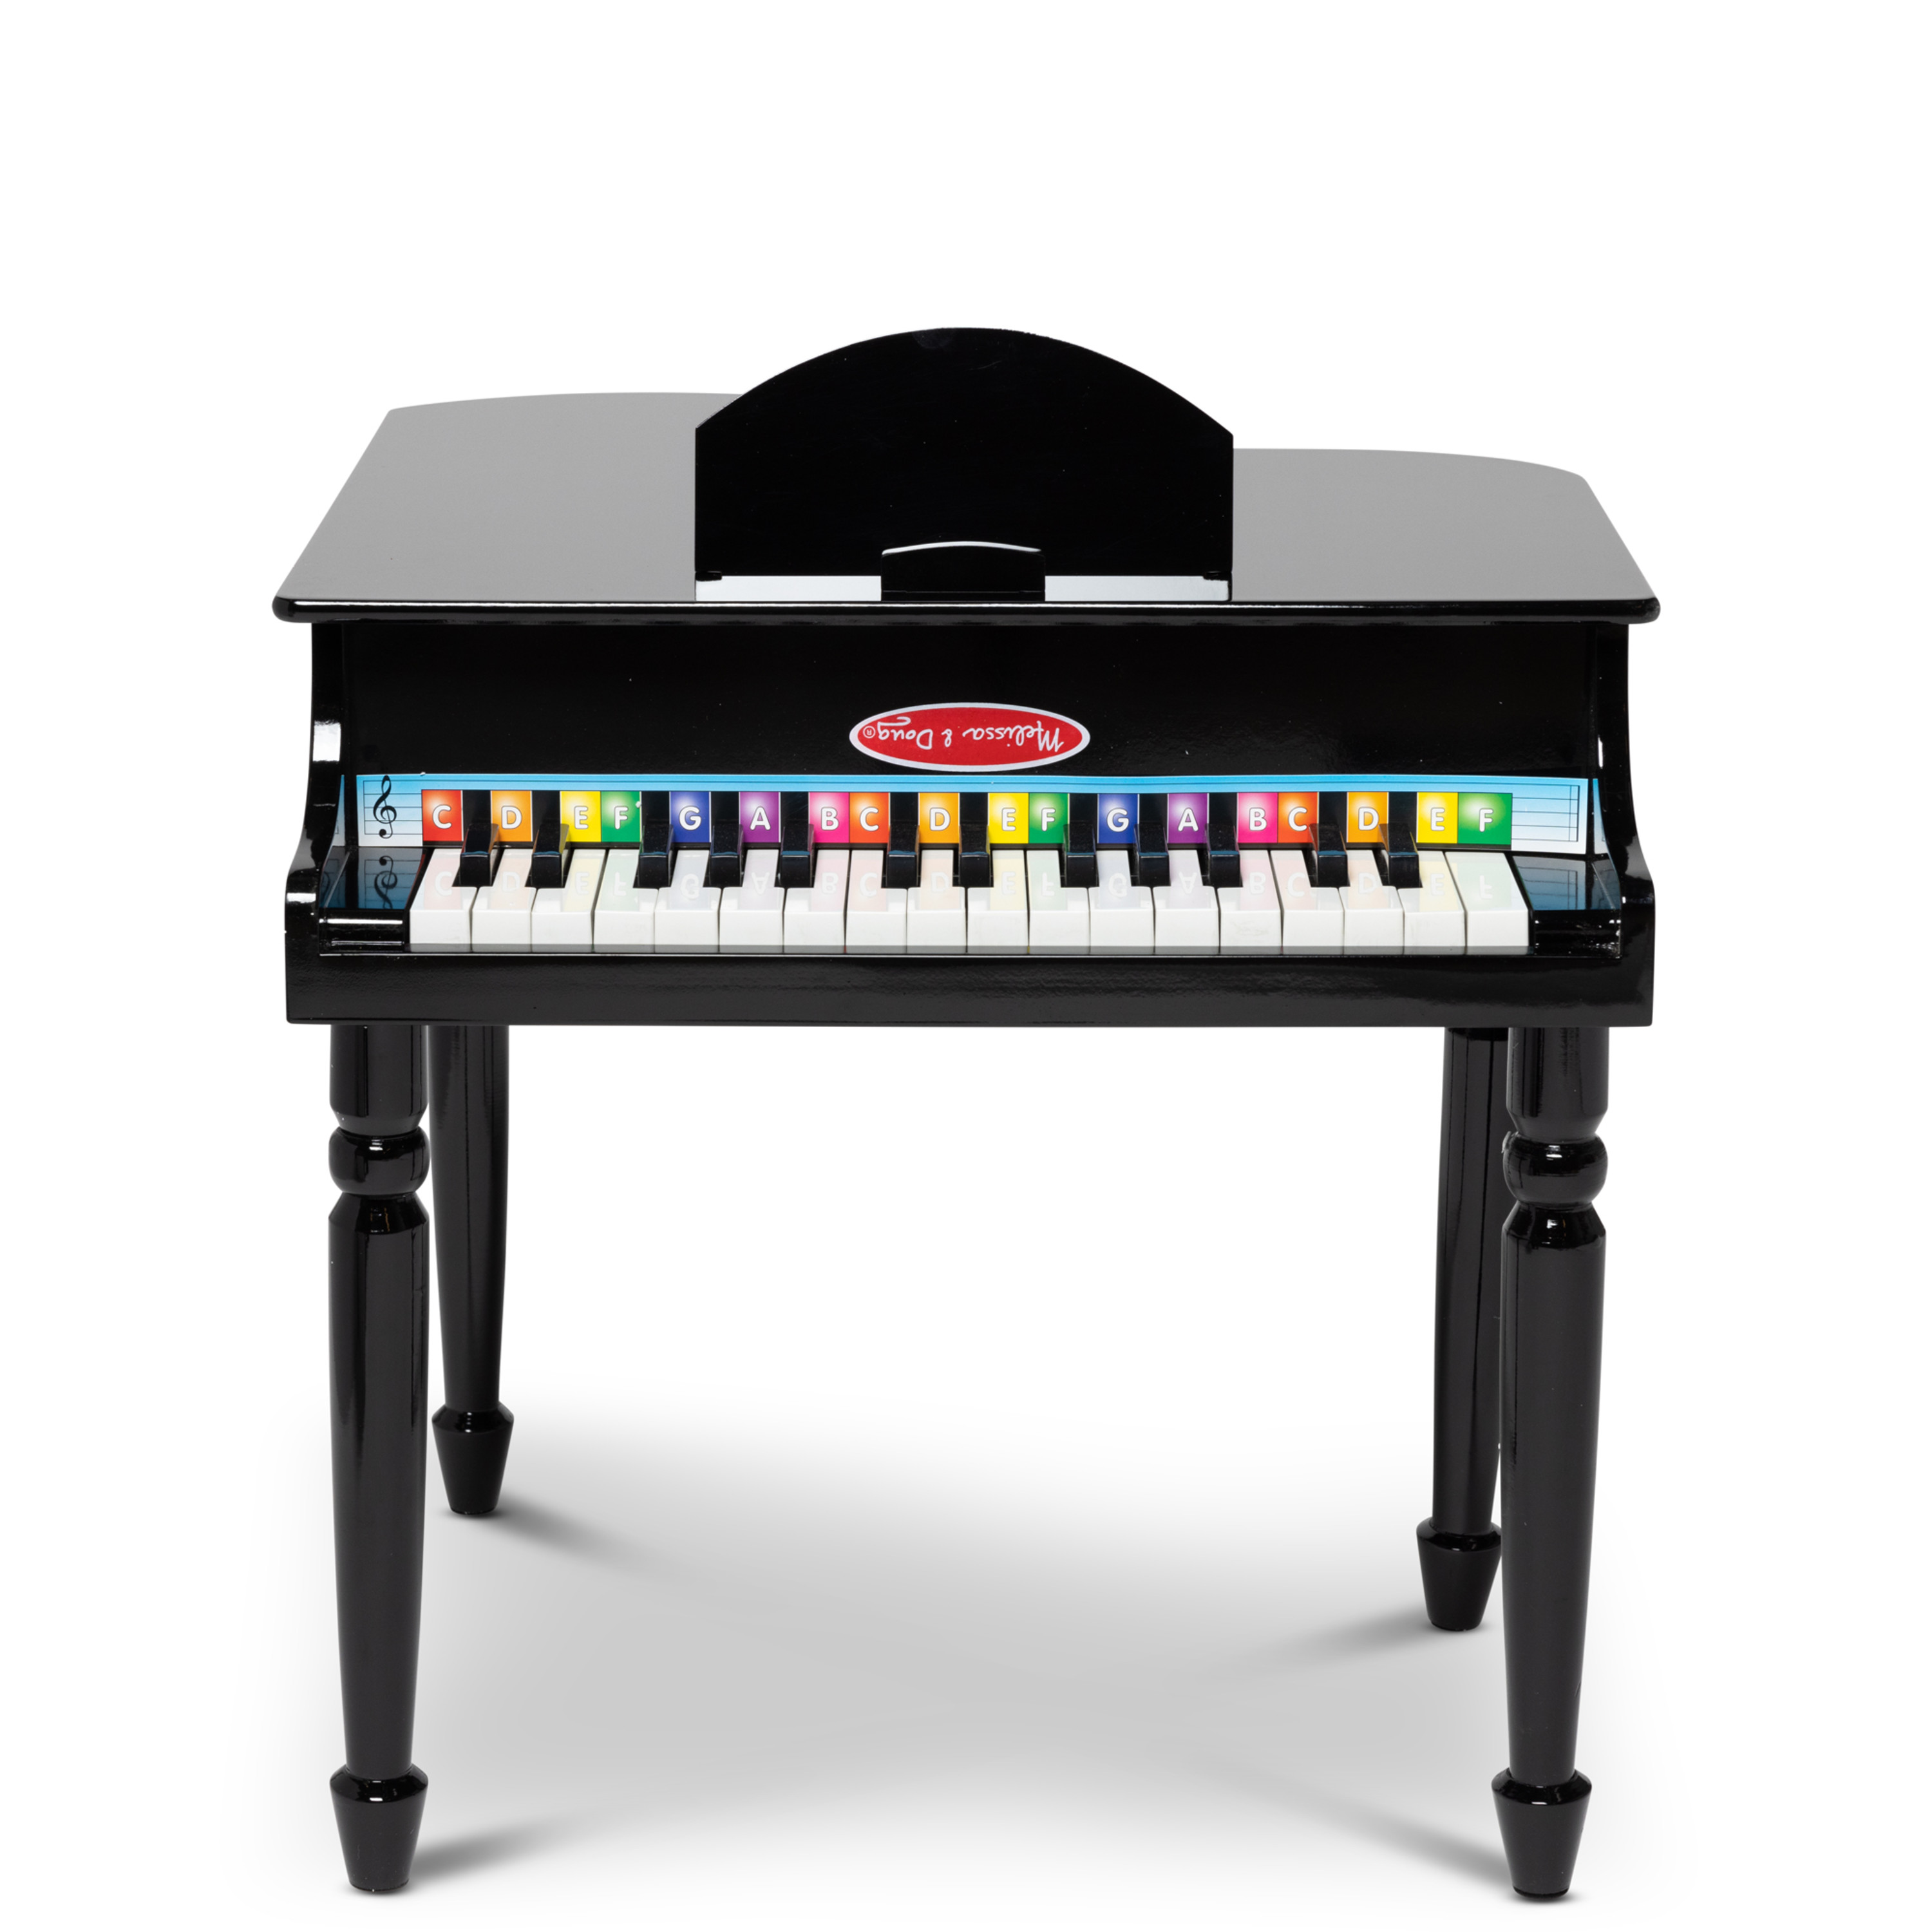 Melissa & Doug Learn-To-Play Classic Grand Piano Toy For Kids With 30 Keys, Color-Coded Songbook, and Non-Tip Bench - image 5 of 10